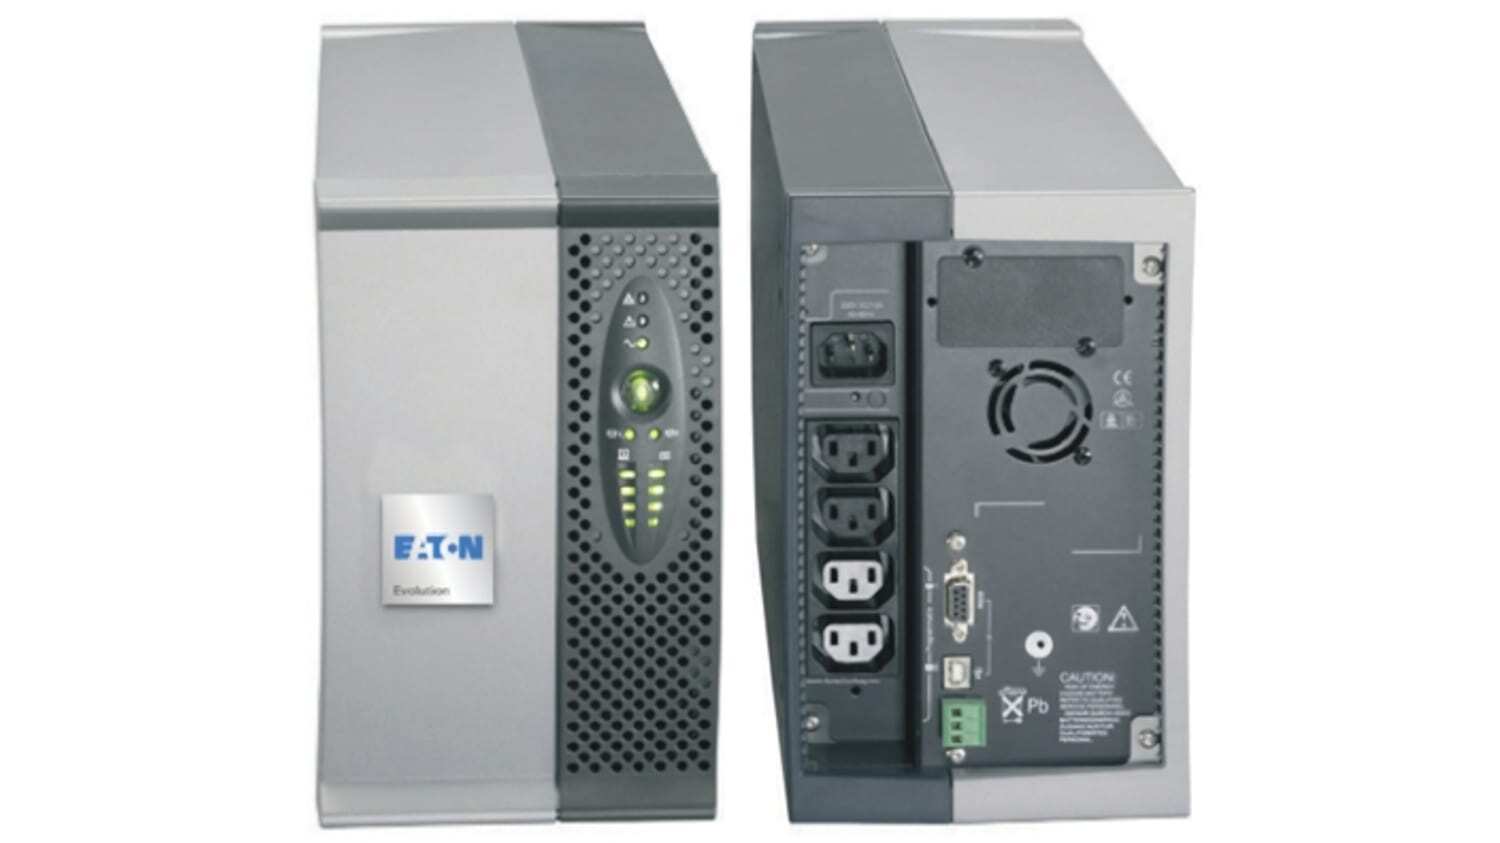 Eaton Evolution 1150 UPS - Protect your computing devices with 770W of power